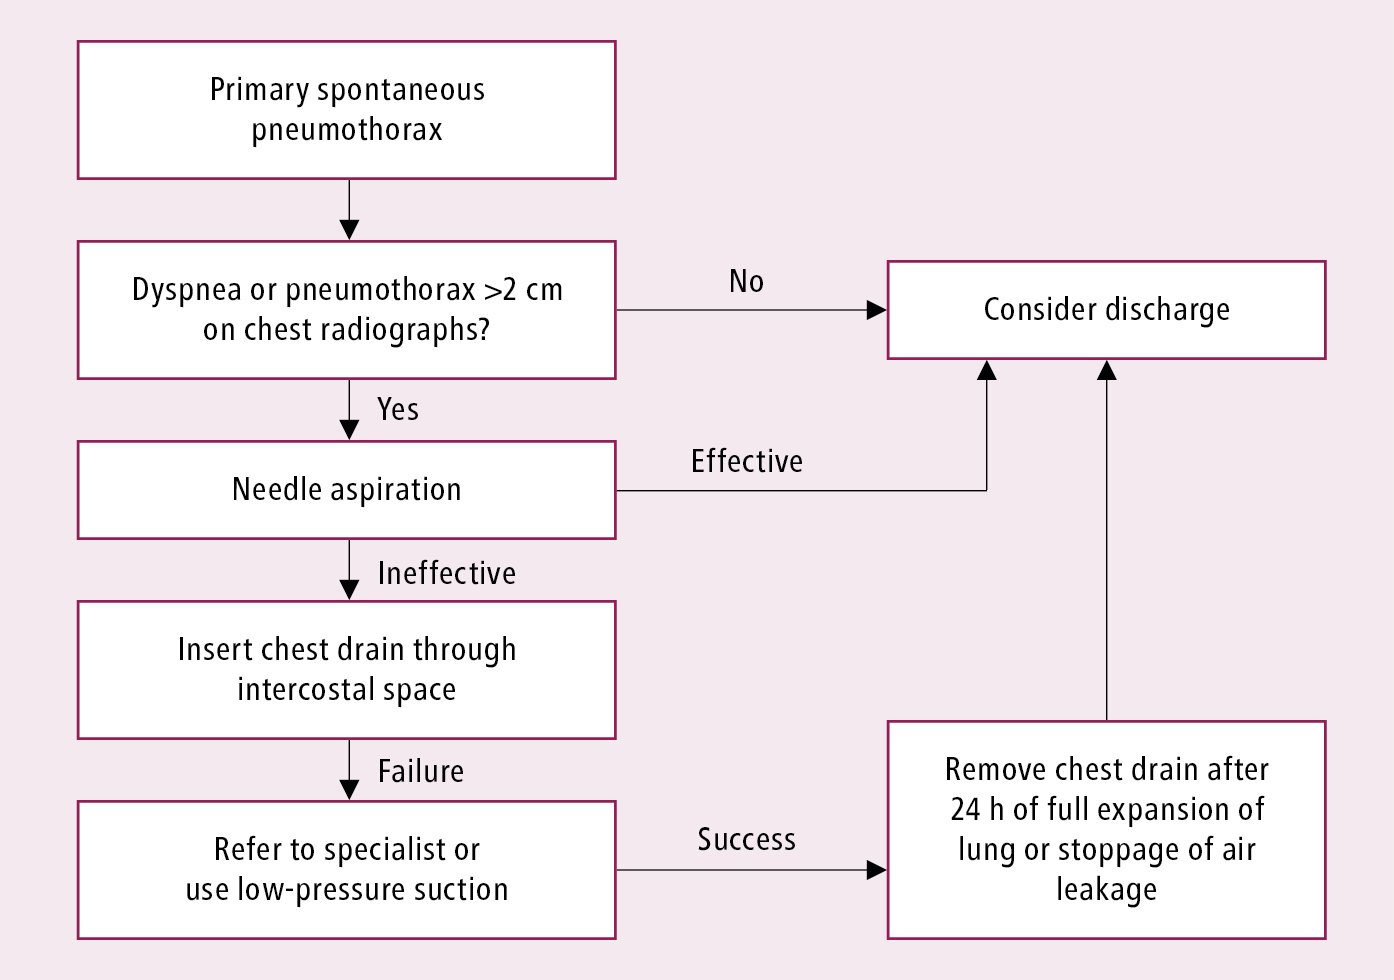 Figure 031_3827.  Treatment algorithm of primary spontaneous pneumothorax.  Adapted from  Thorax. 2010;65 Suppl 2:ii18-31 .  